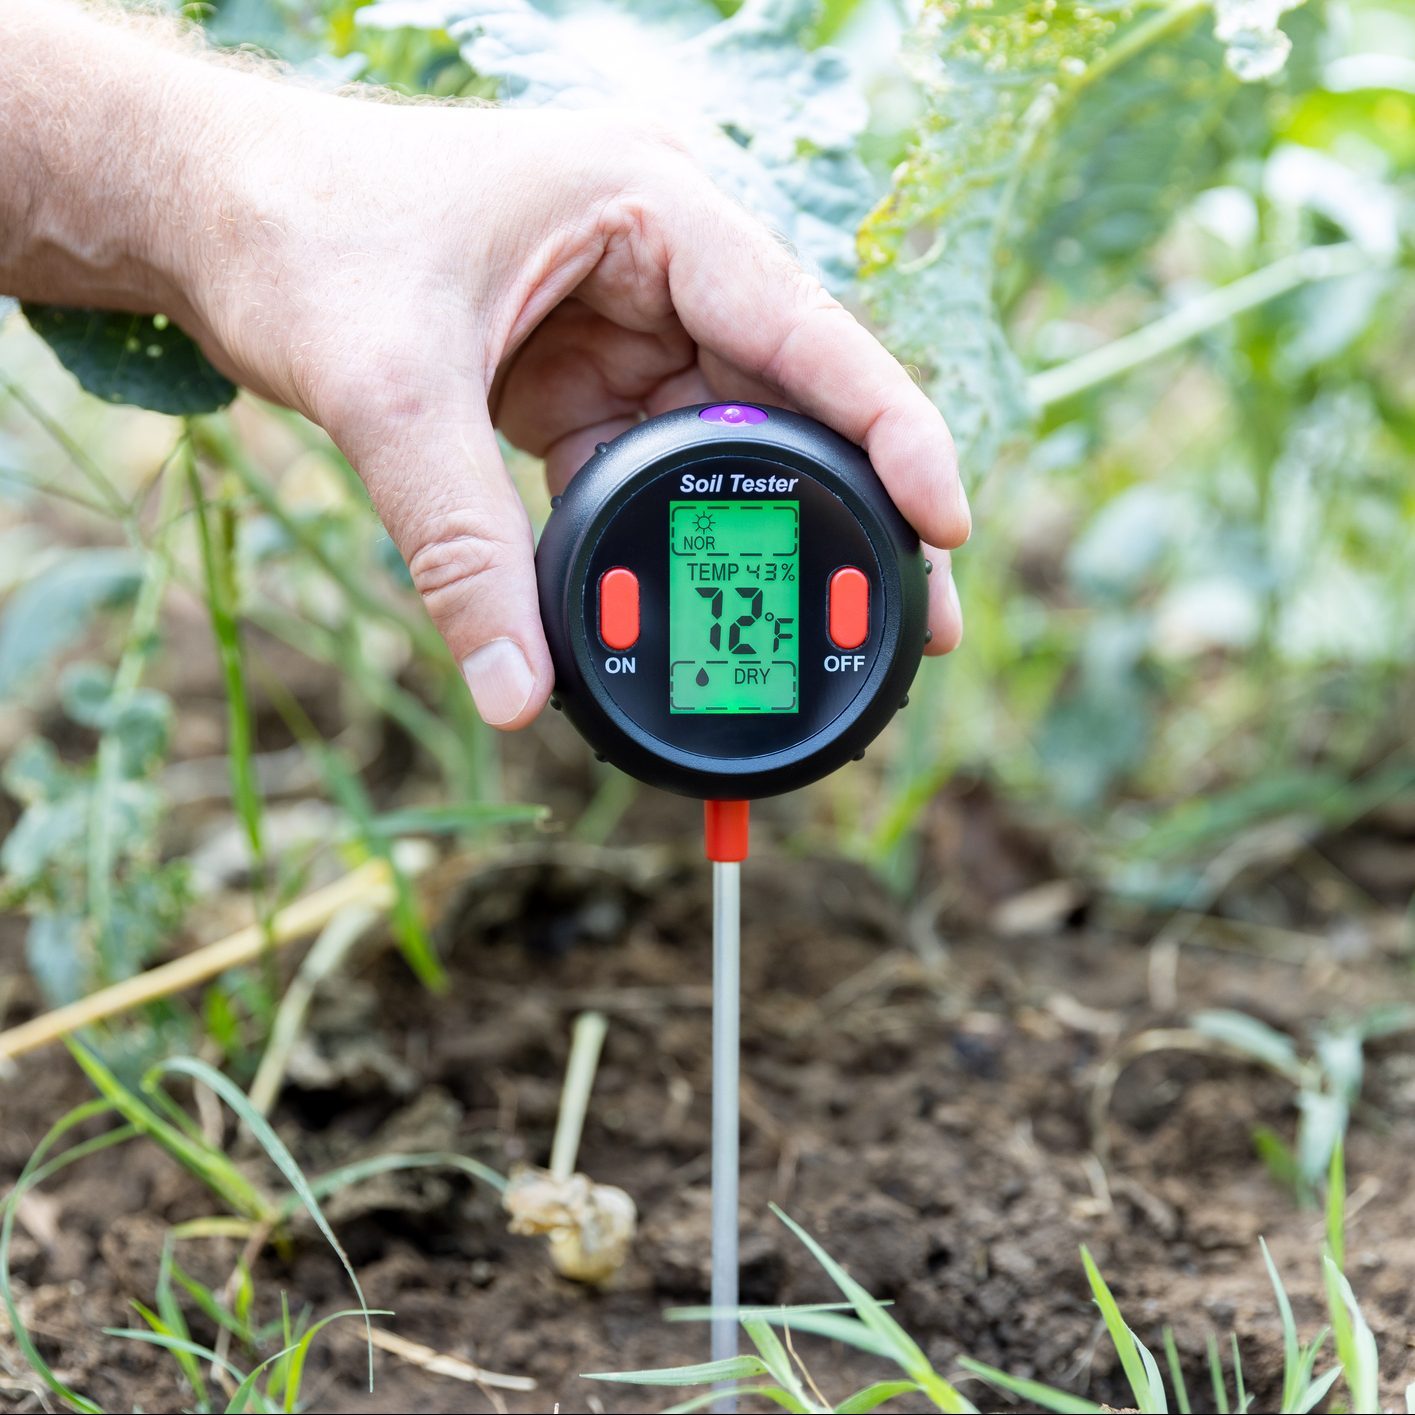 When Is the Best Time of Year for a Soil Test?